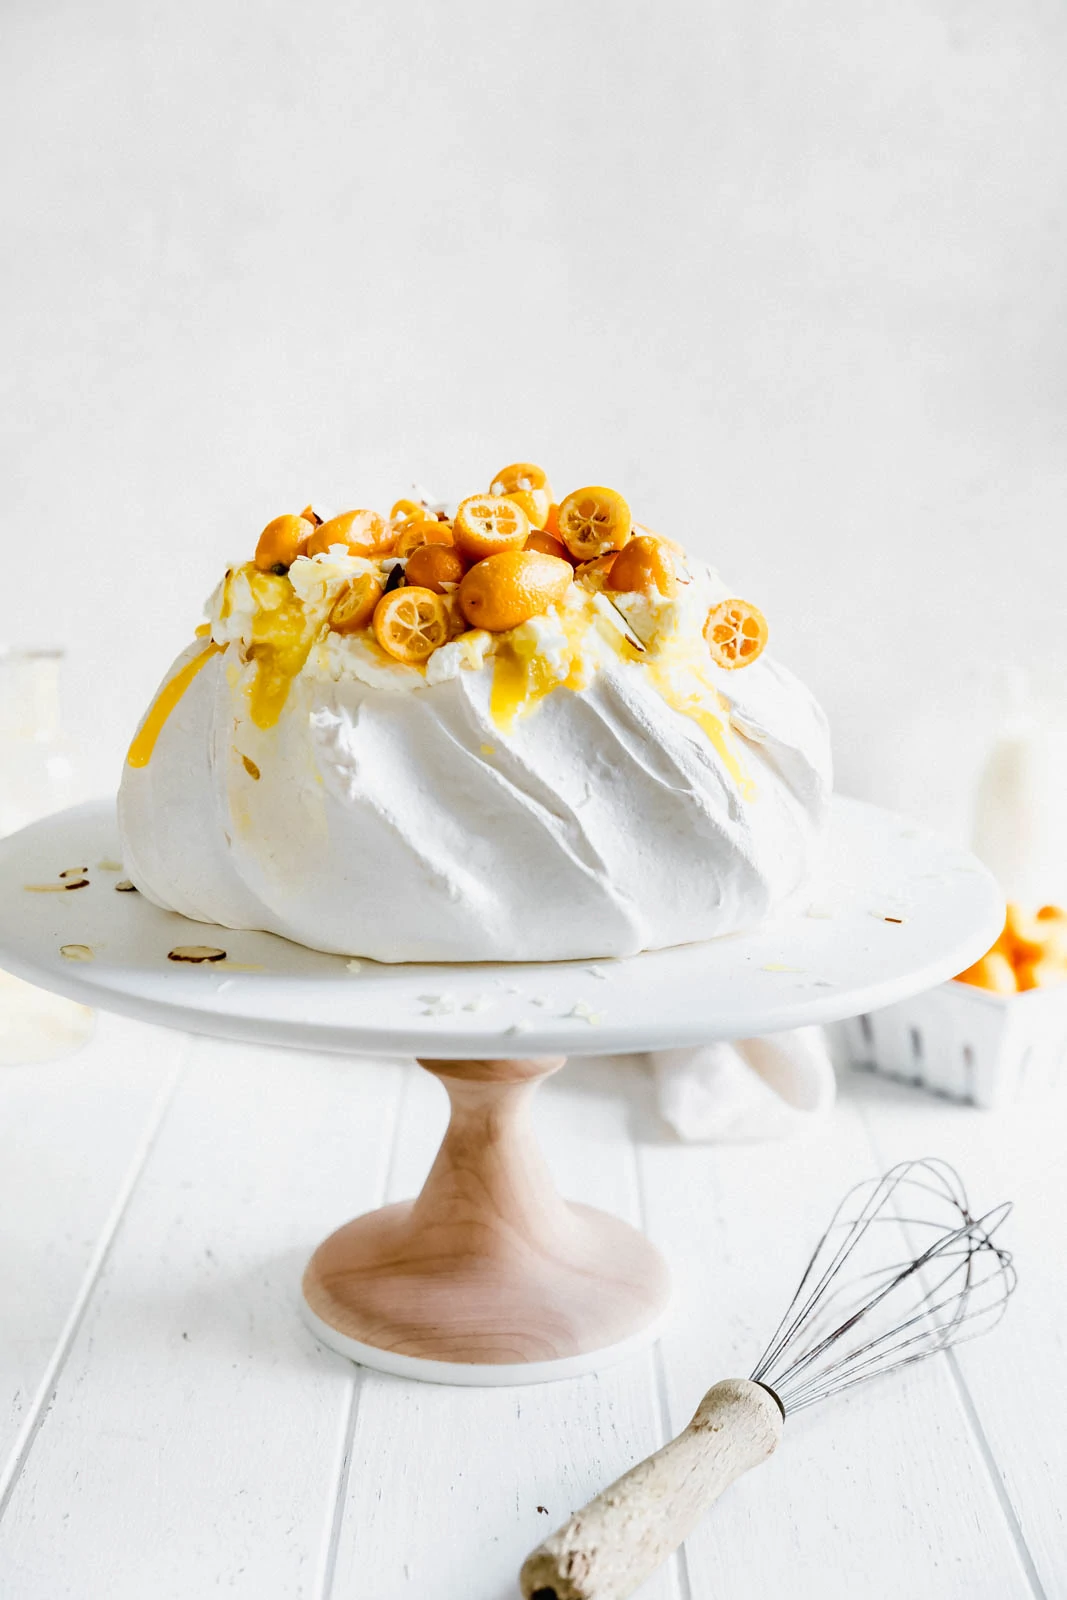 Make everyone say HUBBA HUBBA with this showstopping white chocolate and lemon curd pavlova topped with baby kumquats and sliced almonds. 